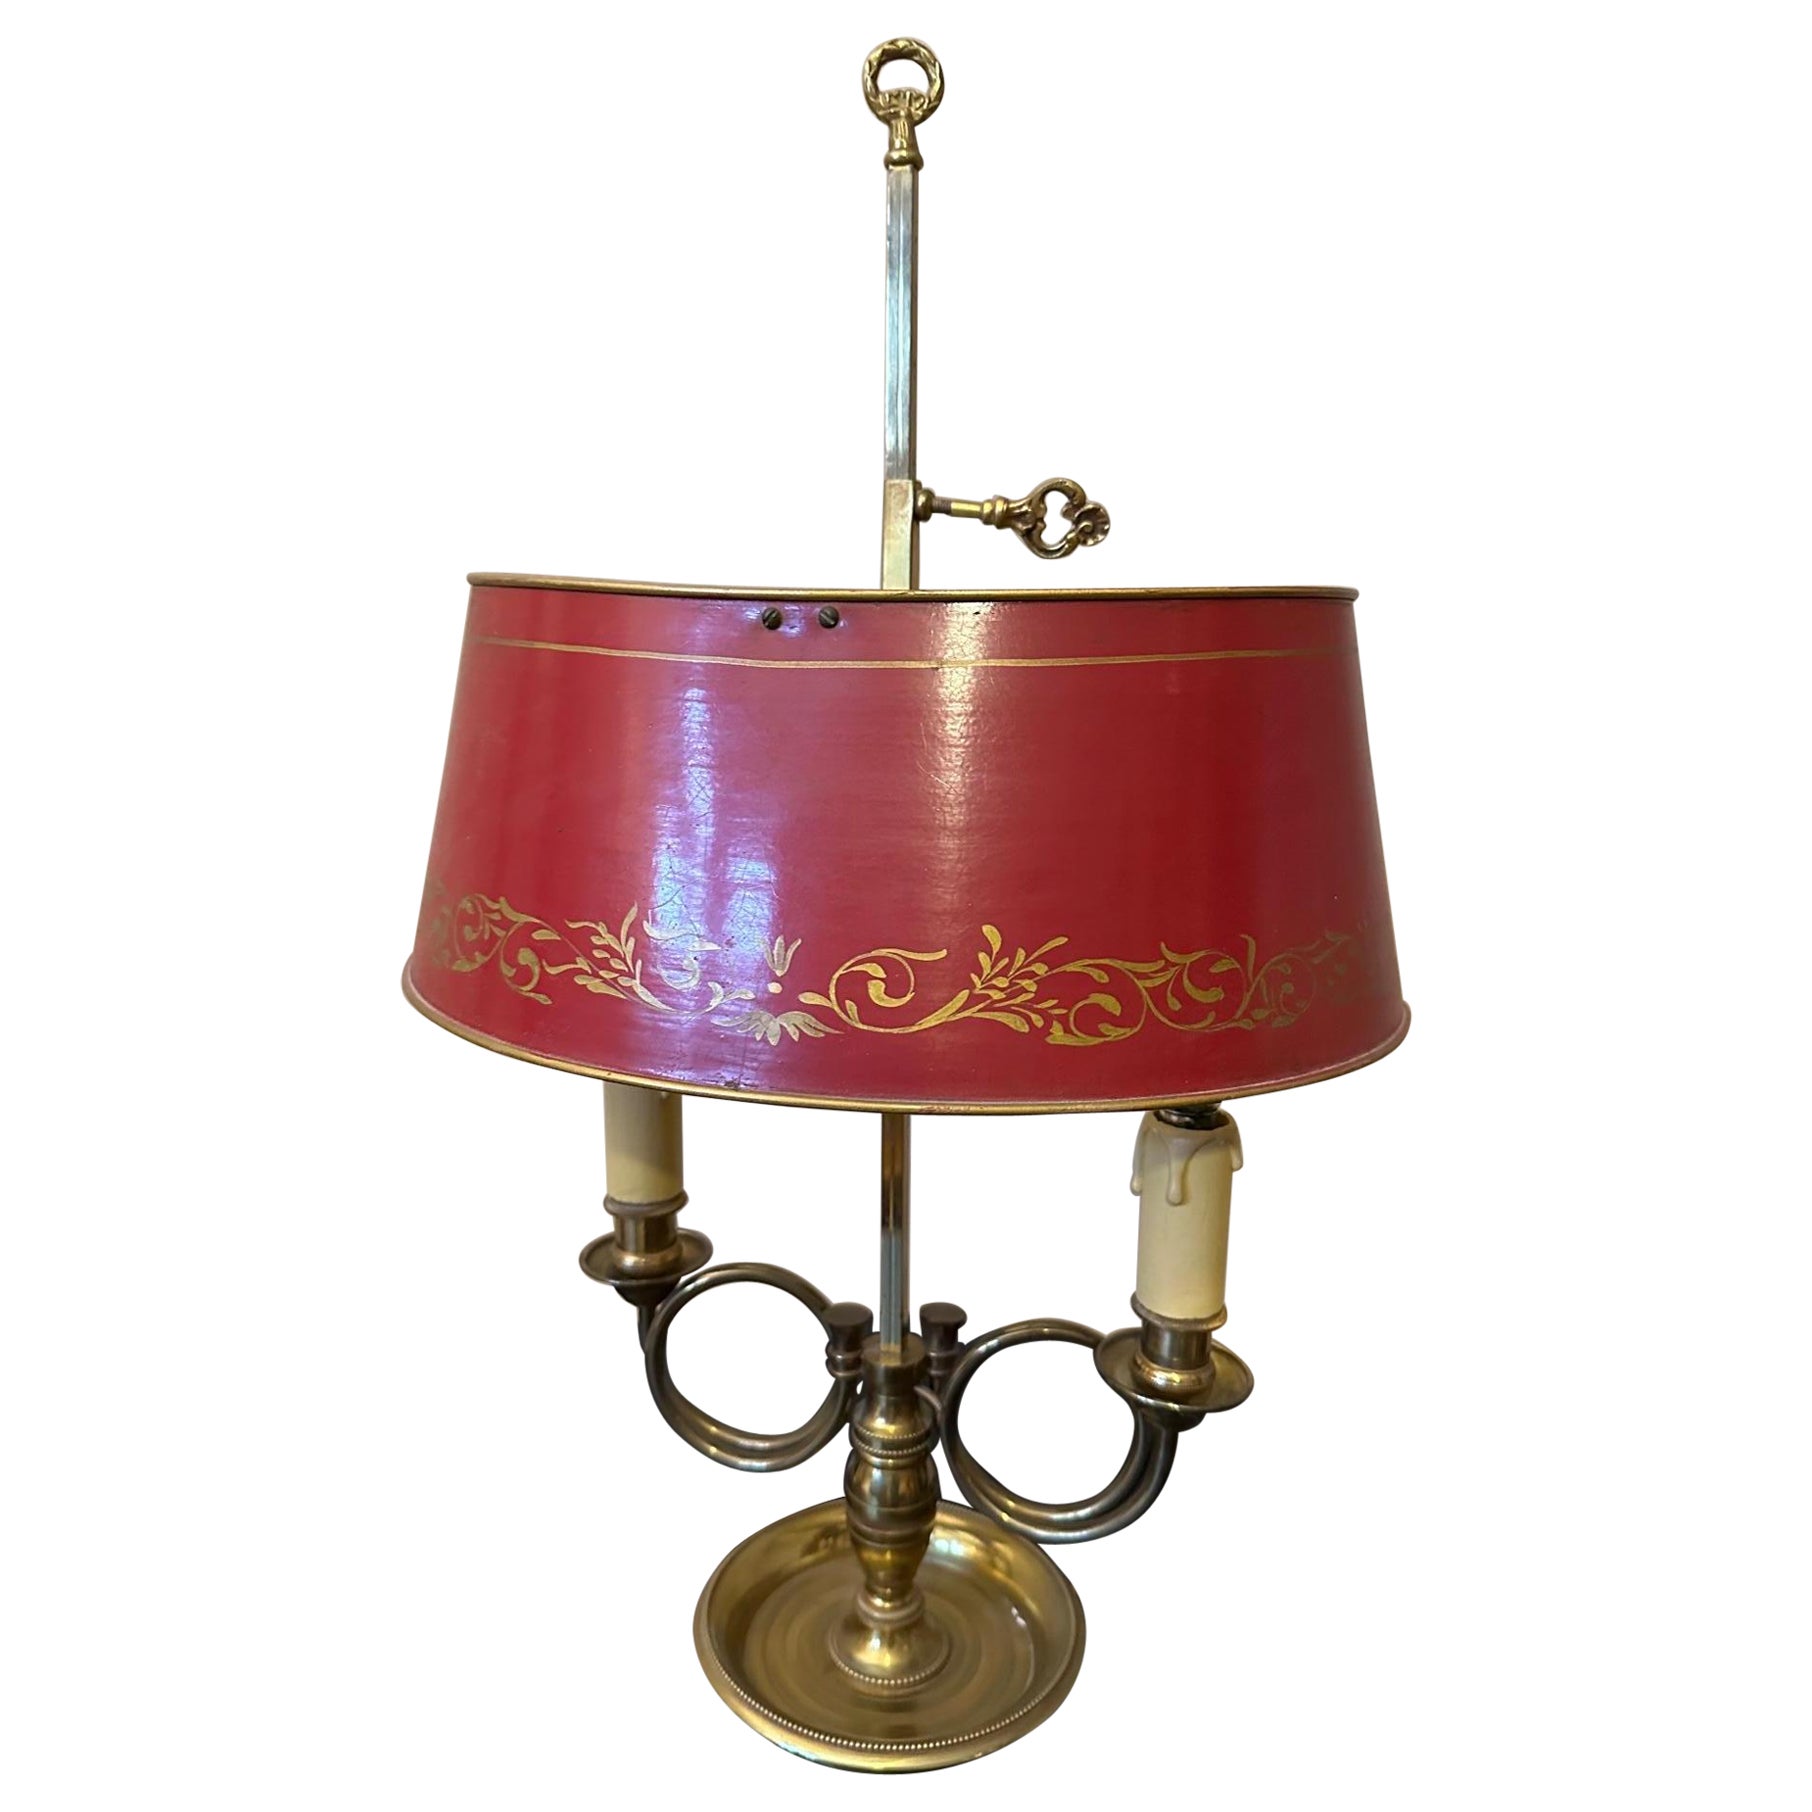 20th century French Mid-century Brass and Hand painted Tole Shade